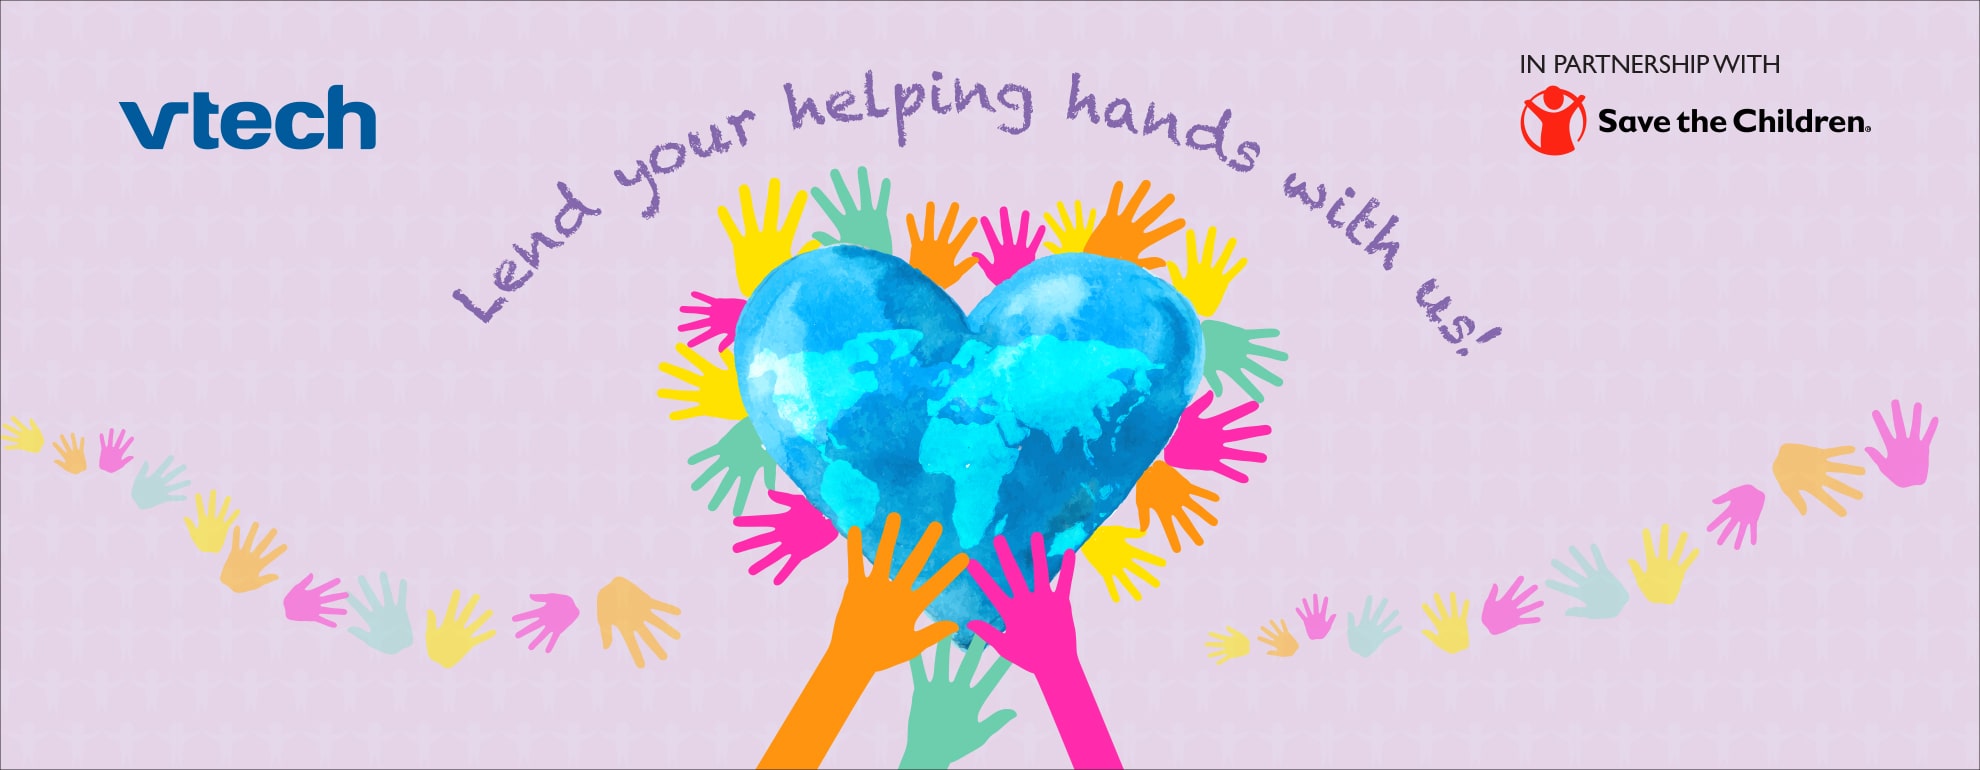 Lend your helping hands with us! In partership with Save the Children